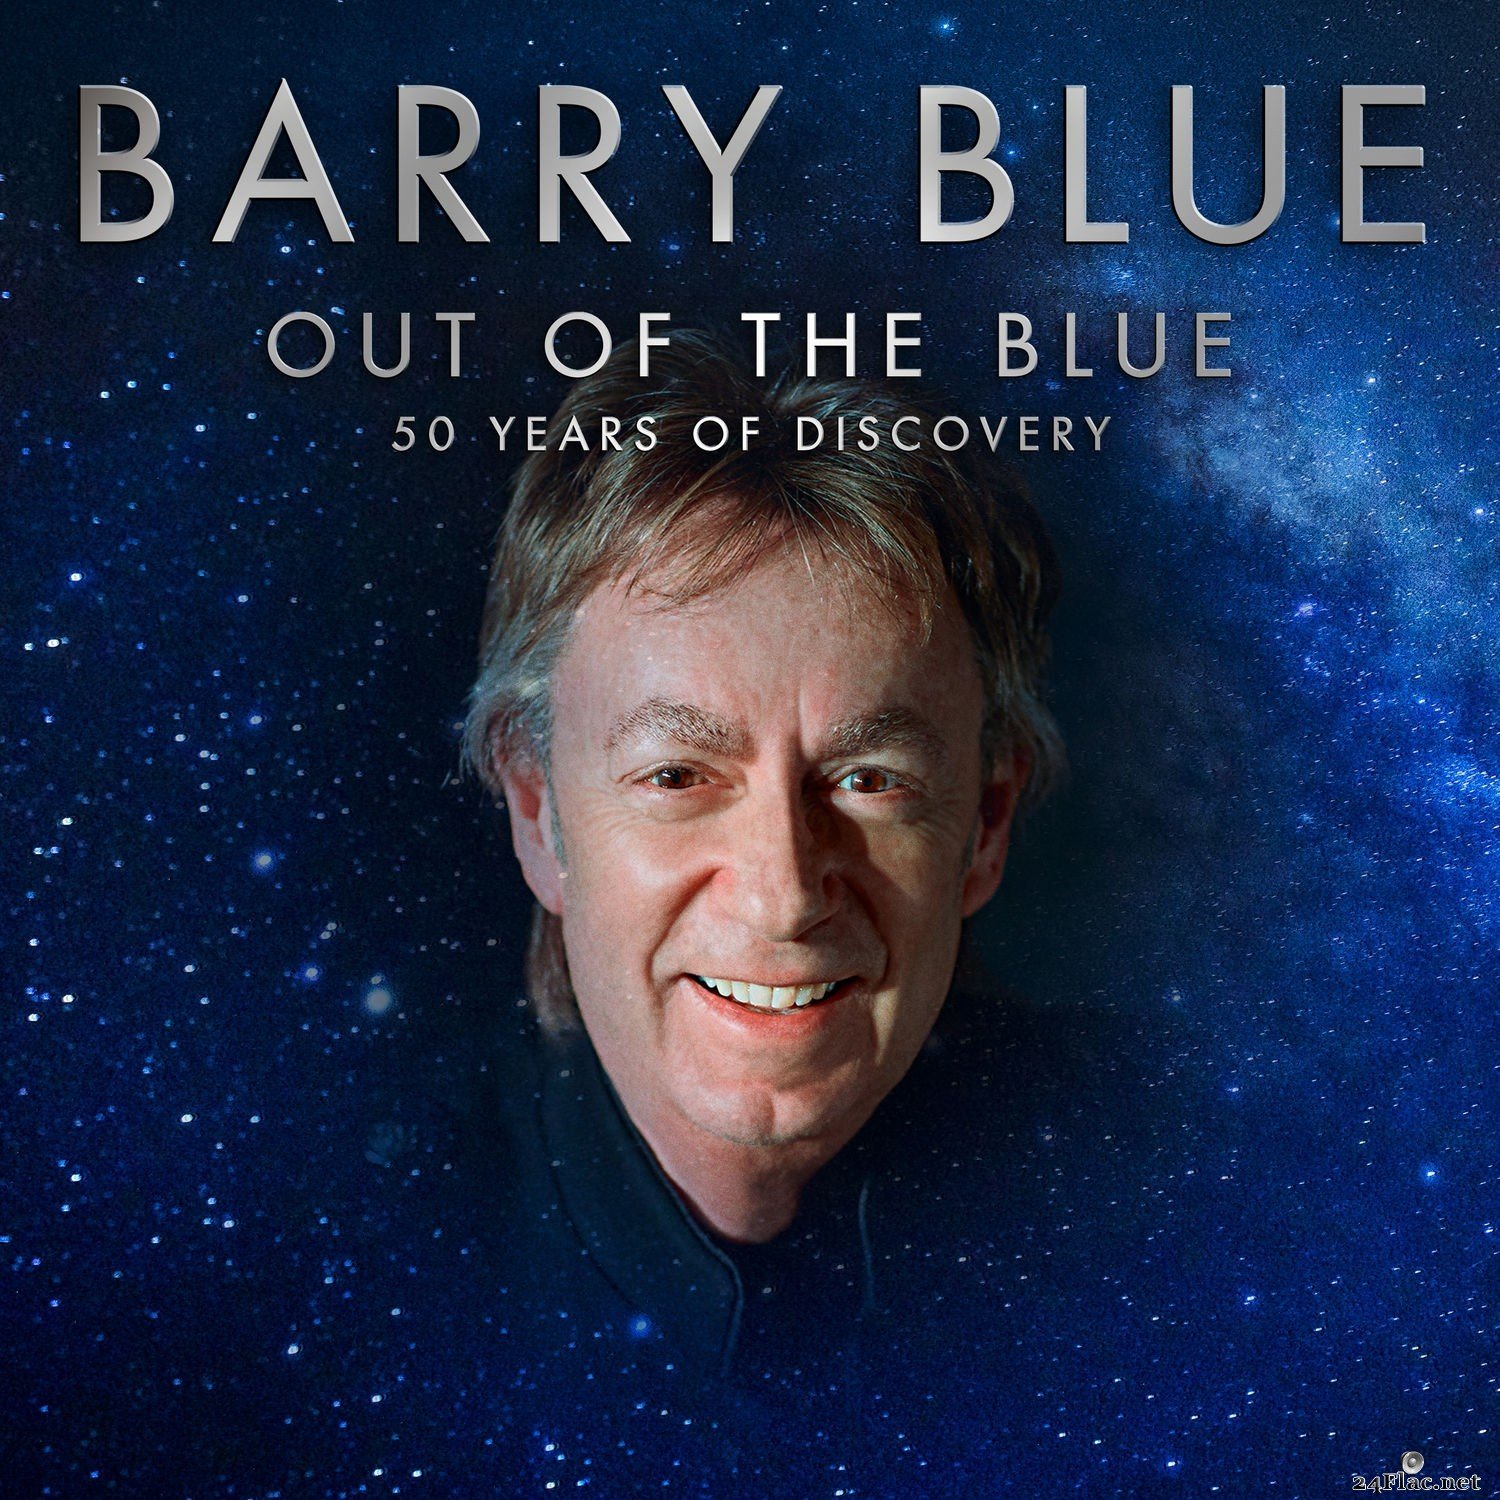 Barry Blue - Out of the Blue (50 Years of Discovery) (2021) Hi-Res